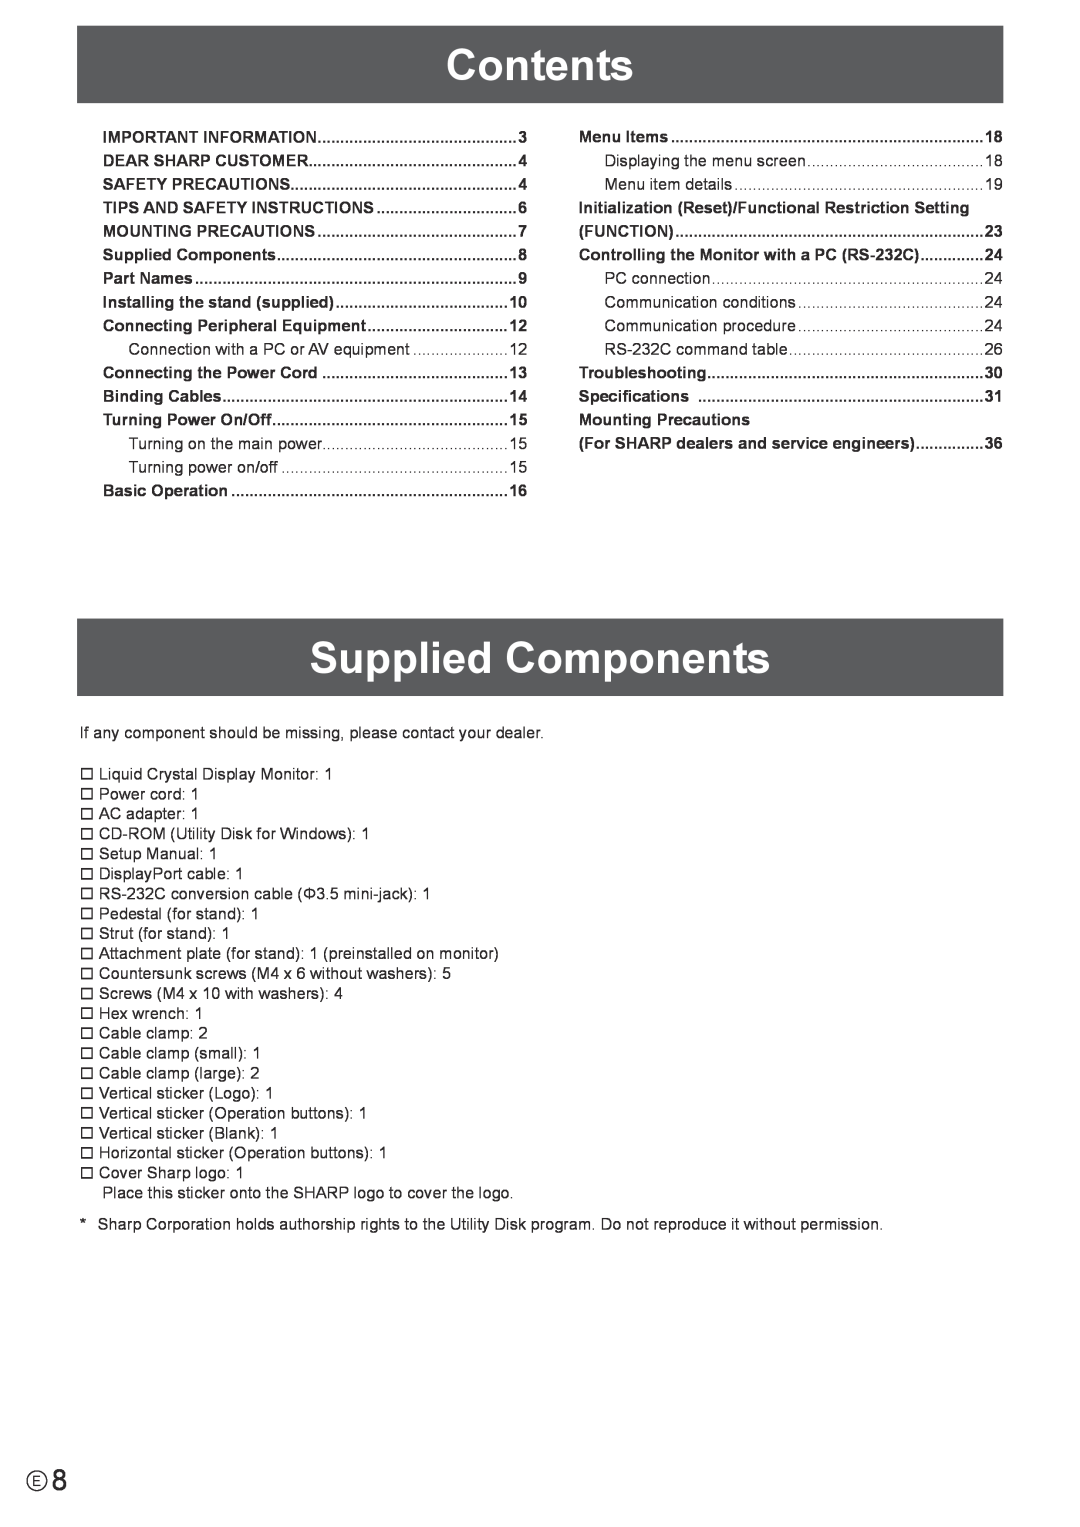 Sharp PN-K321 operation manual Contents, Supplied Components 